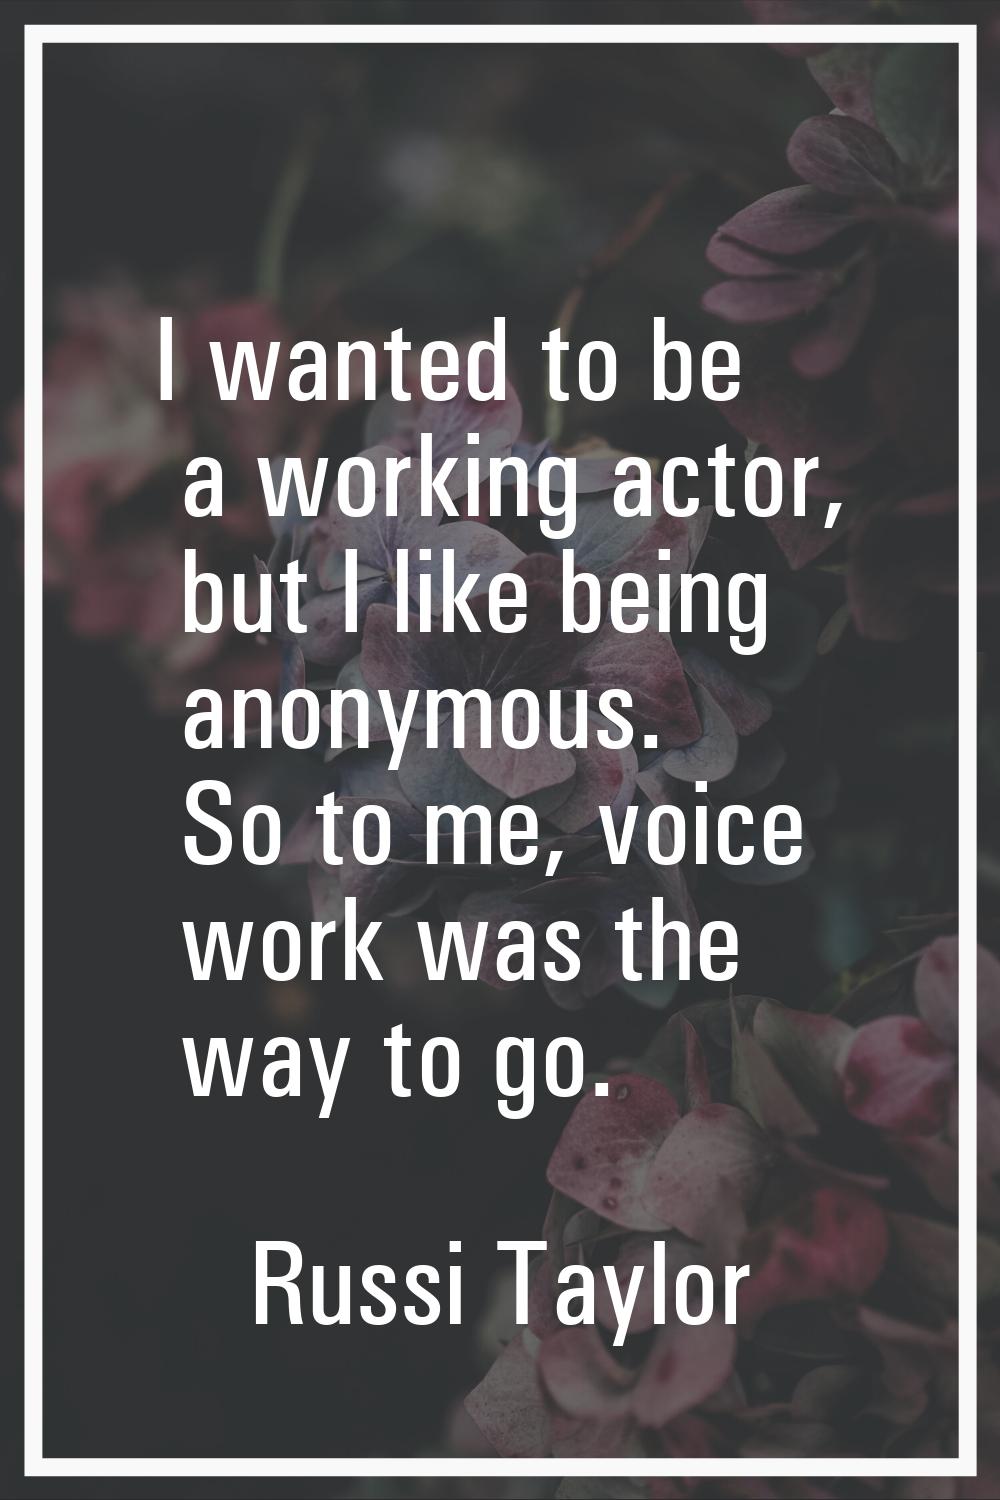 I wanted to be a working actor, but I like being anonymous. So to me, voice work was the way to go.